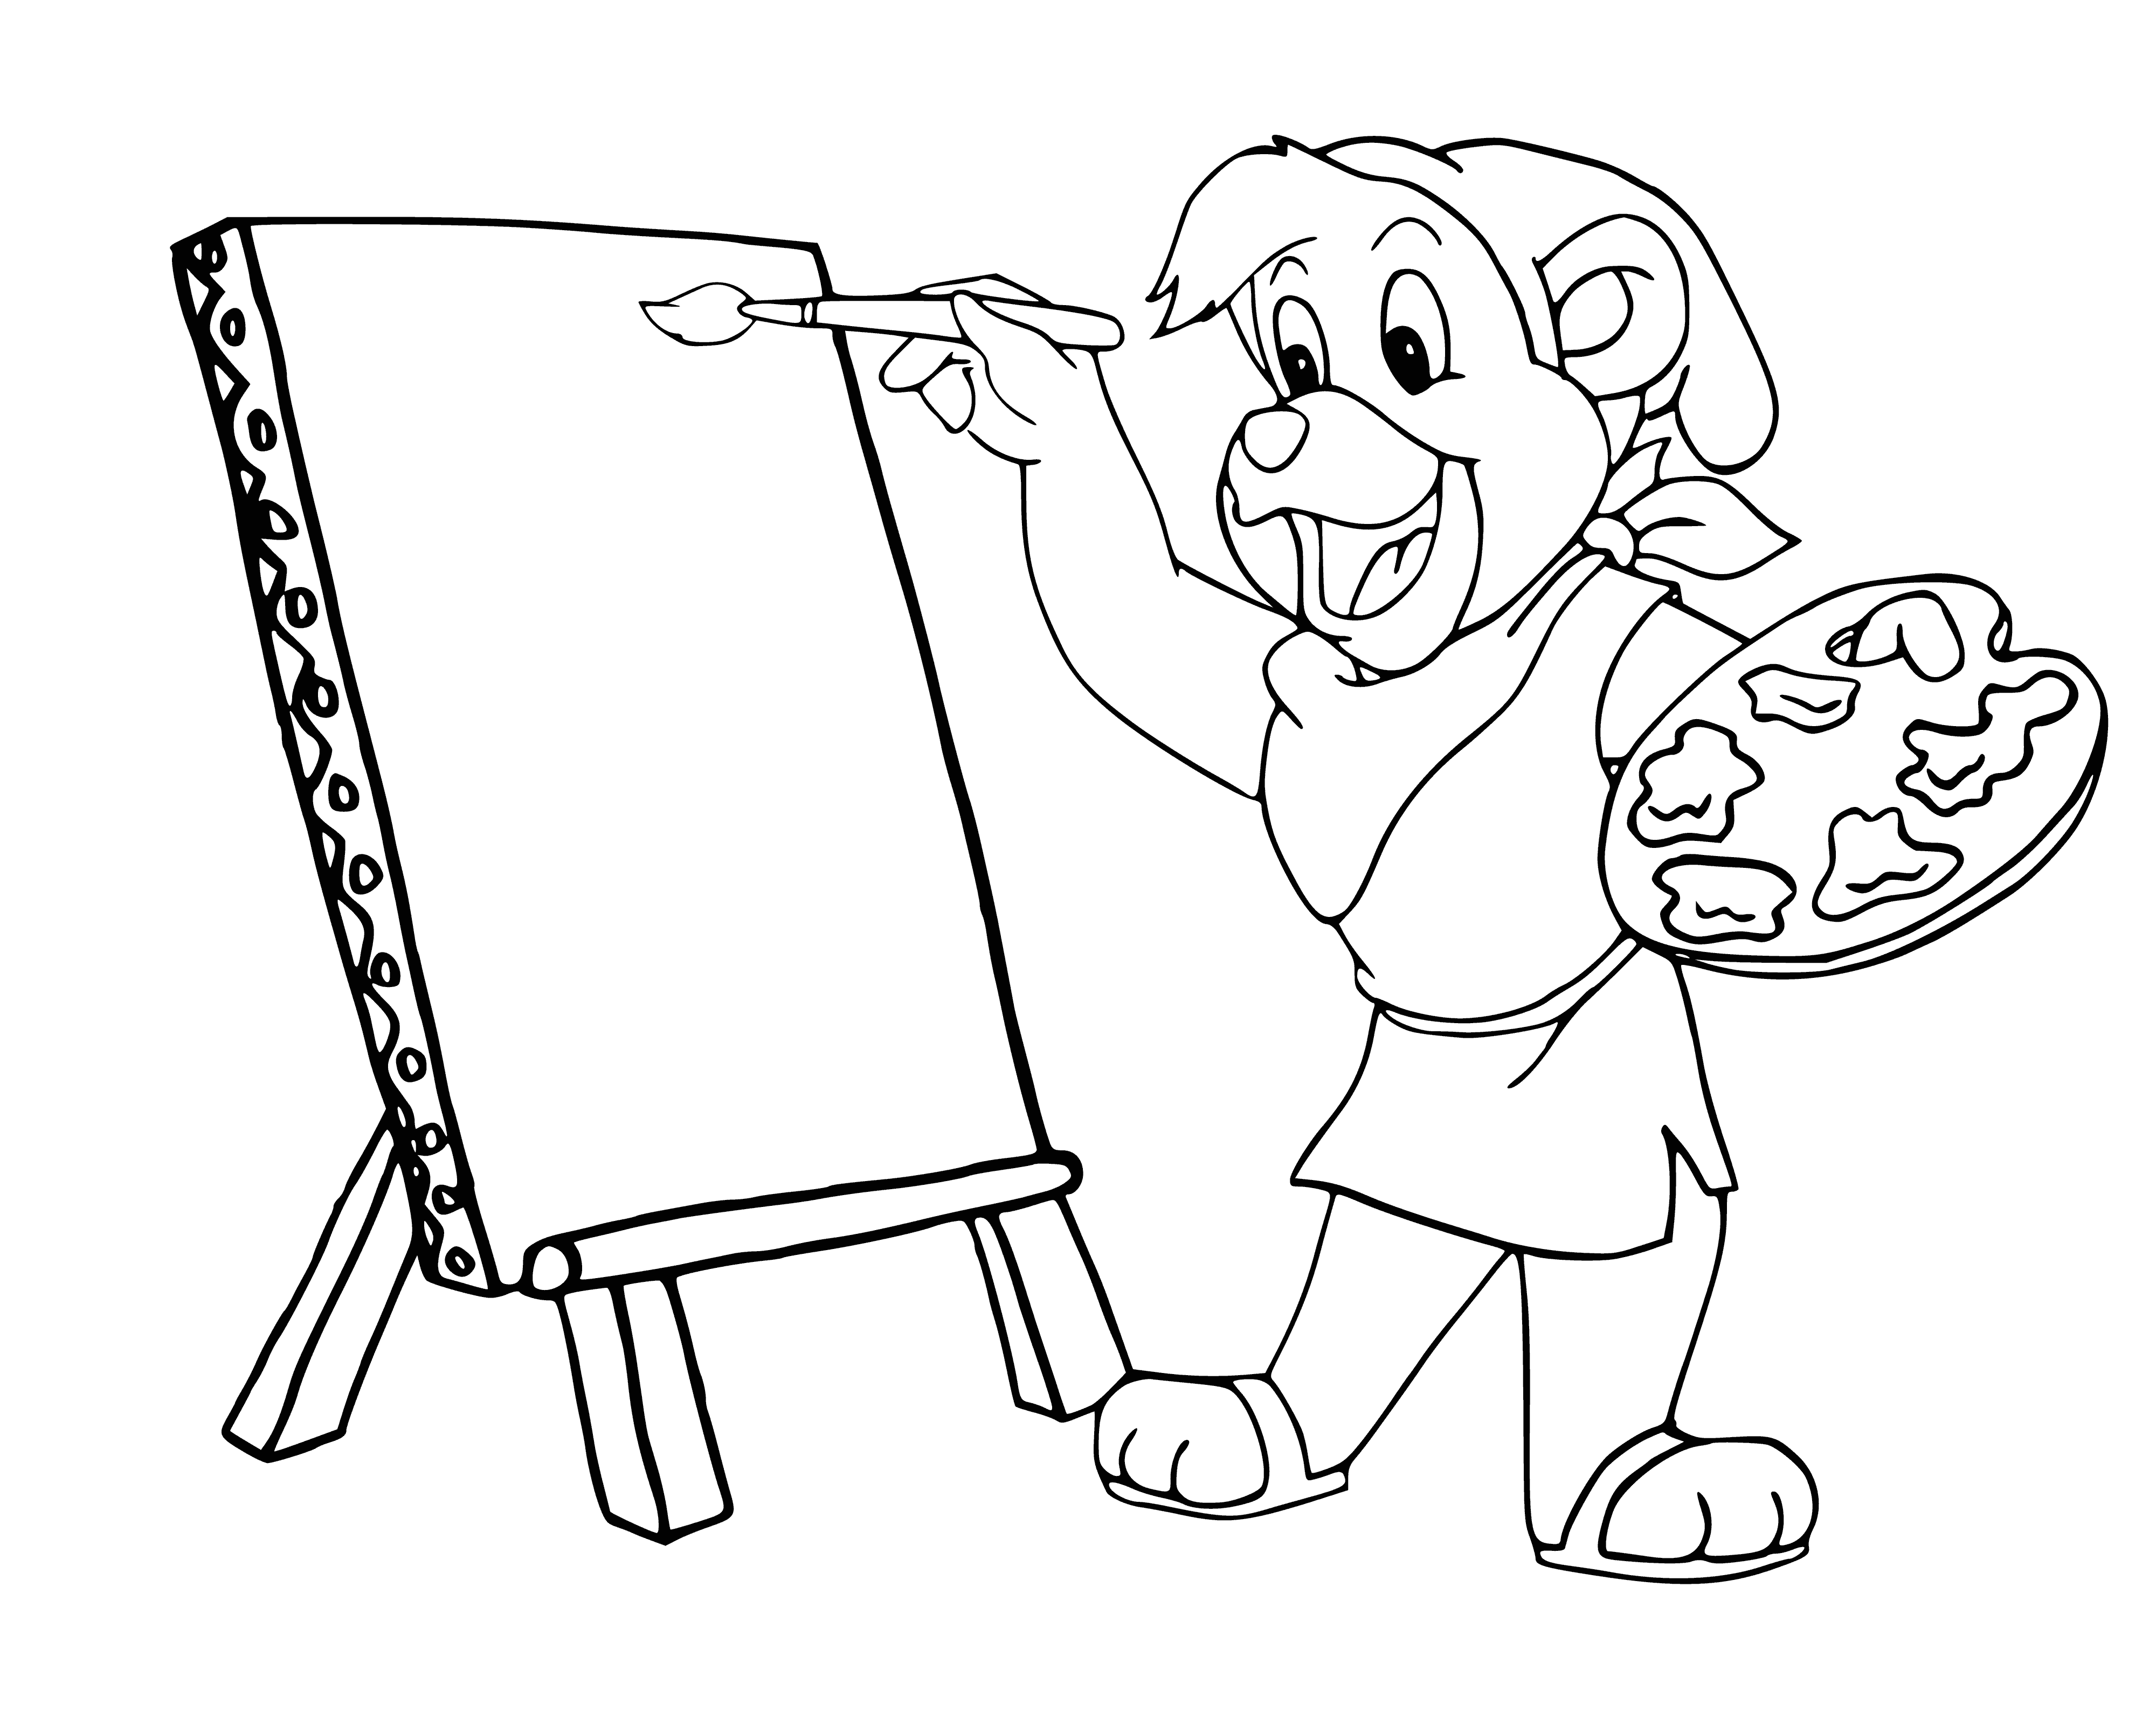 coloring page: A light brown mouse wearing a blue and white striped shirt, blue pants and a blue beret is holding a paintbrush and a yellow palette. It stands in front of a white easel, with five orange Gummi Bears painted on the paper.